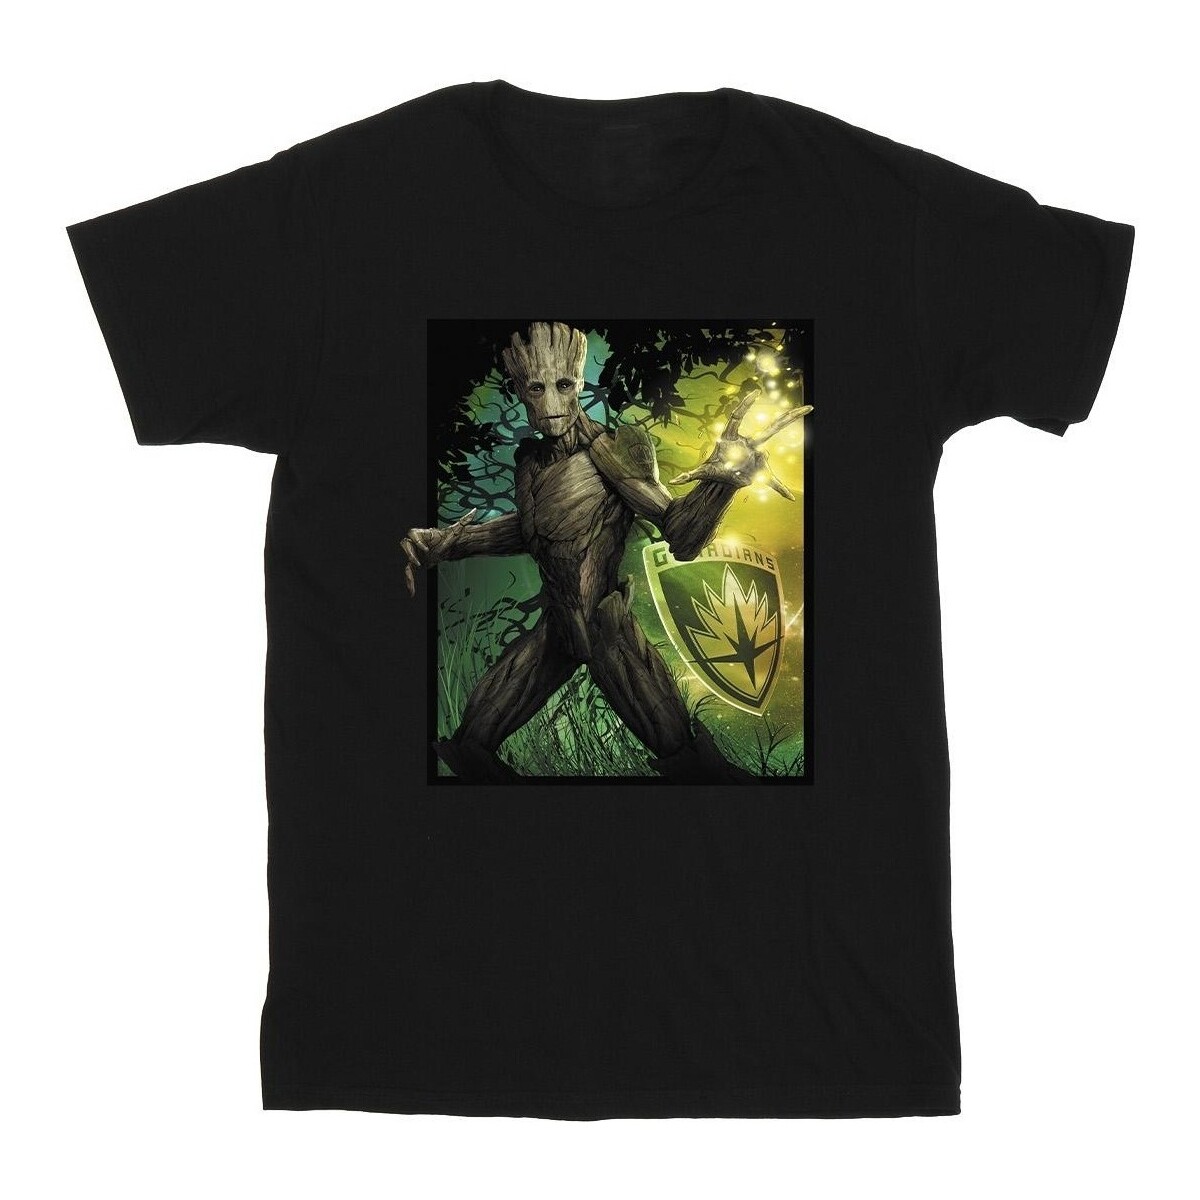 Vêtements Fille basketball film is the Jordan Starting 5 T-Shirt thats arrived in time to match the Guardians Of The Galaxy Groot Forest Energy Noir